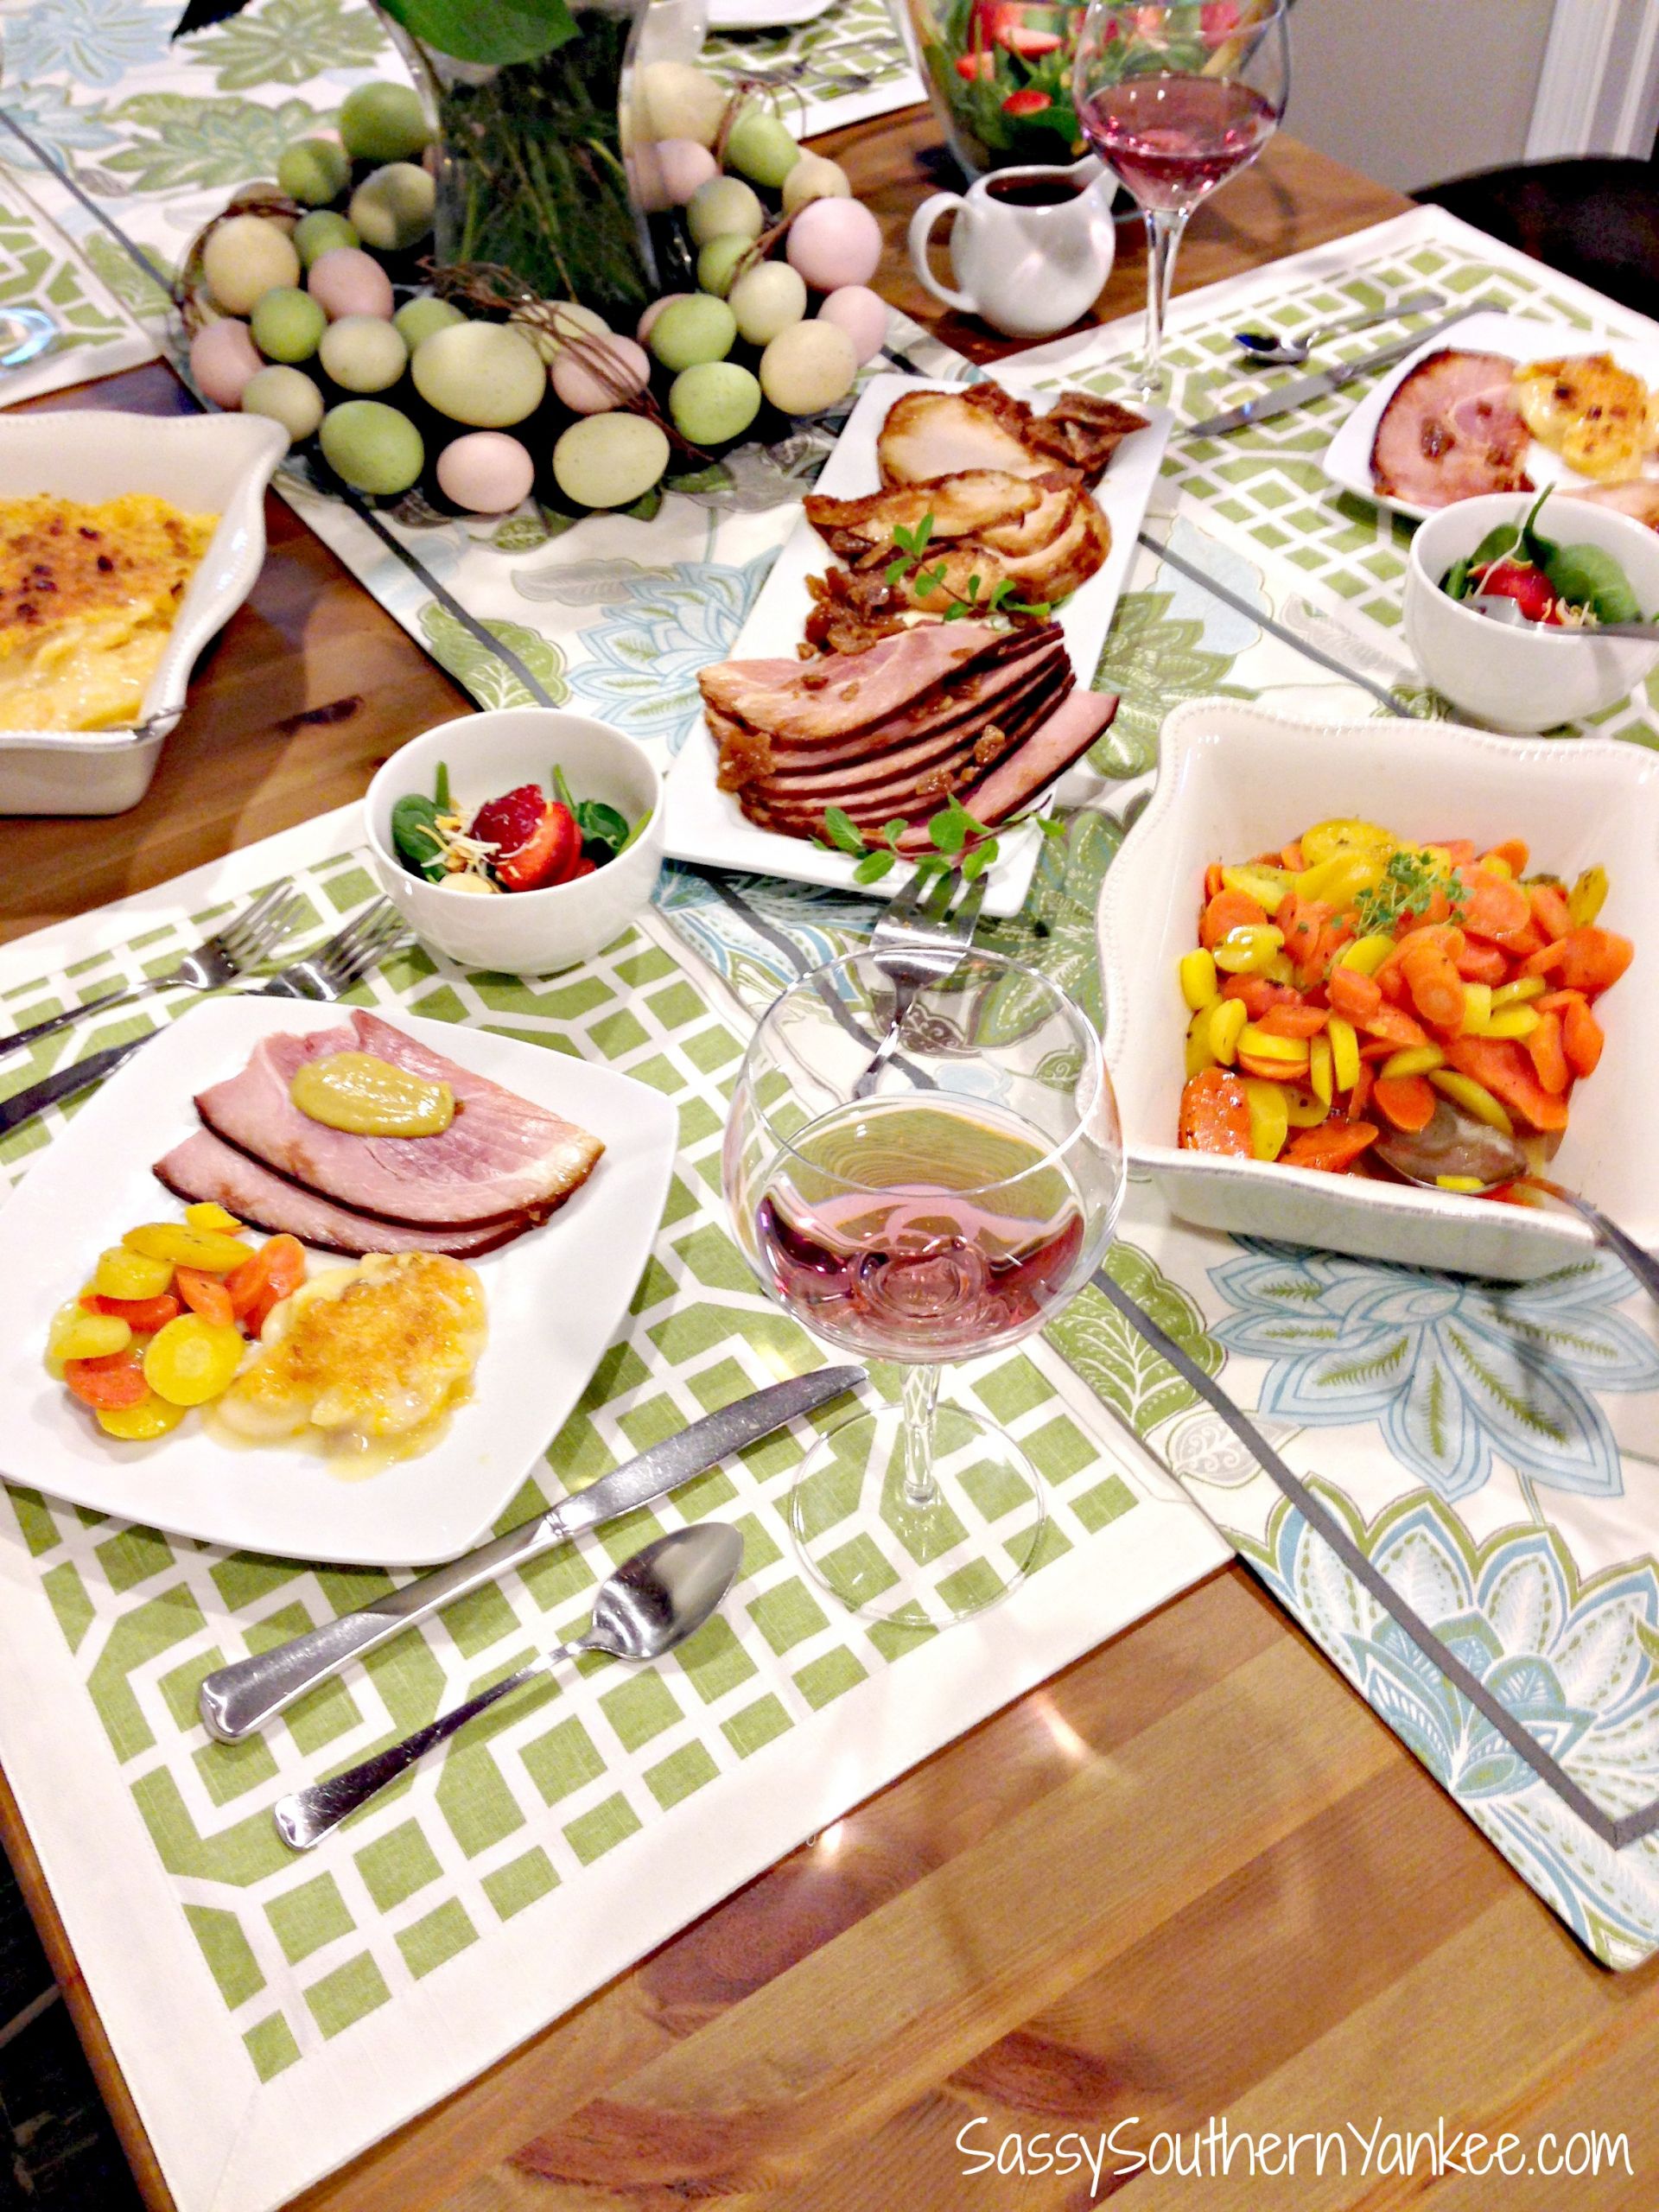 Honey Baked Ham Easter
 Delicious and Easy Easter Dinner with HoneyBaked Ham